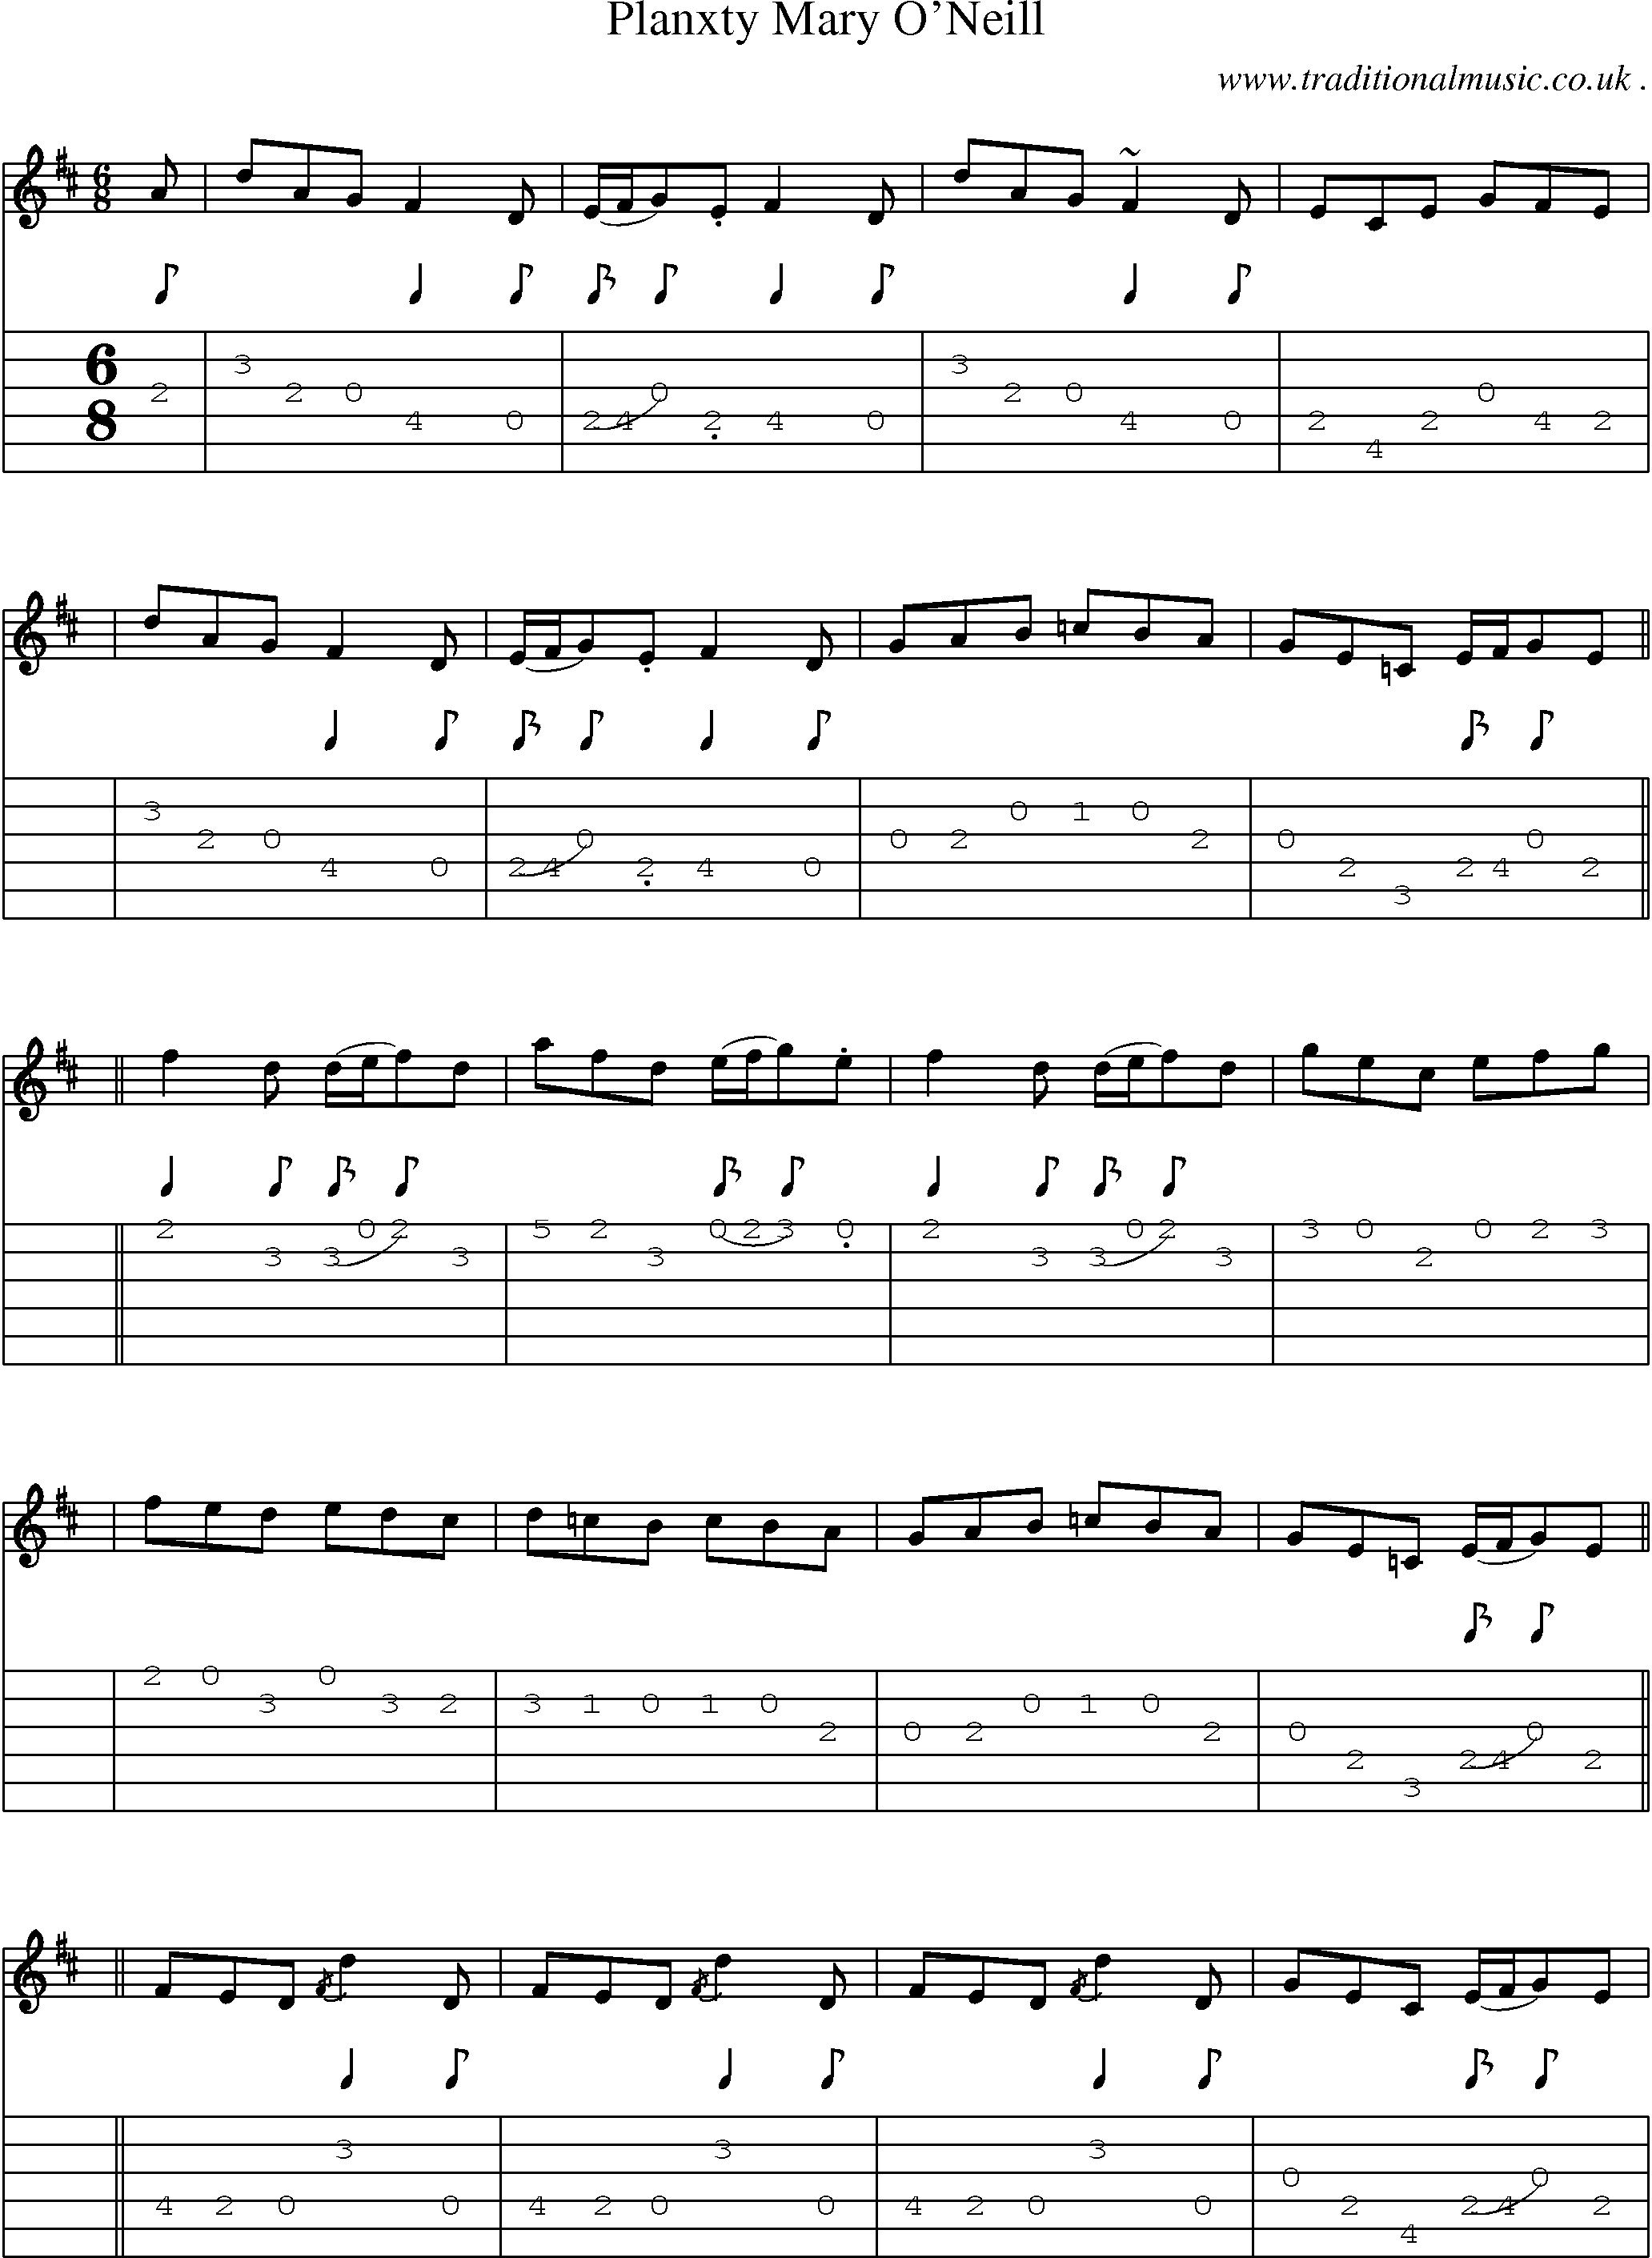 Sheet-music  score, Chords and Guitar Tabs for Planxty Mary Oneill